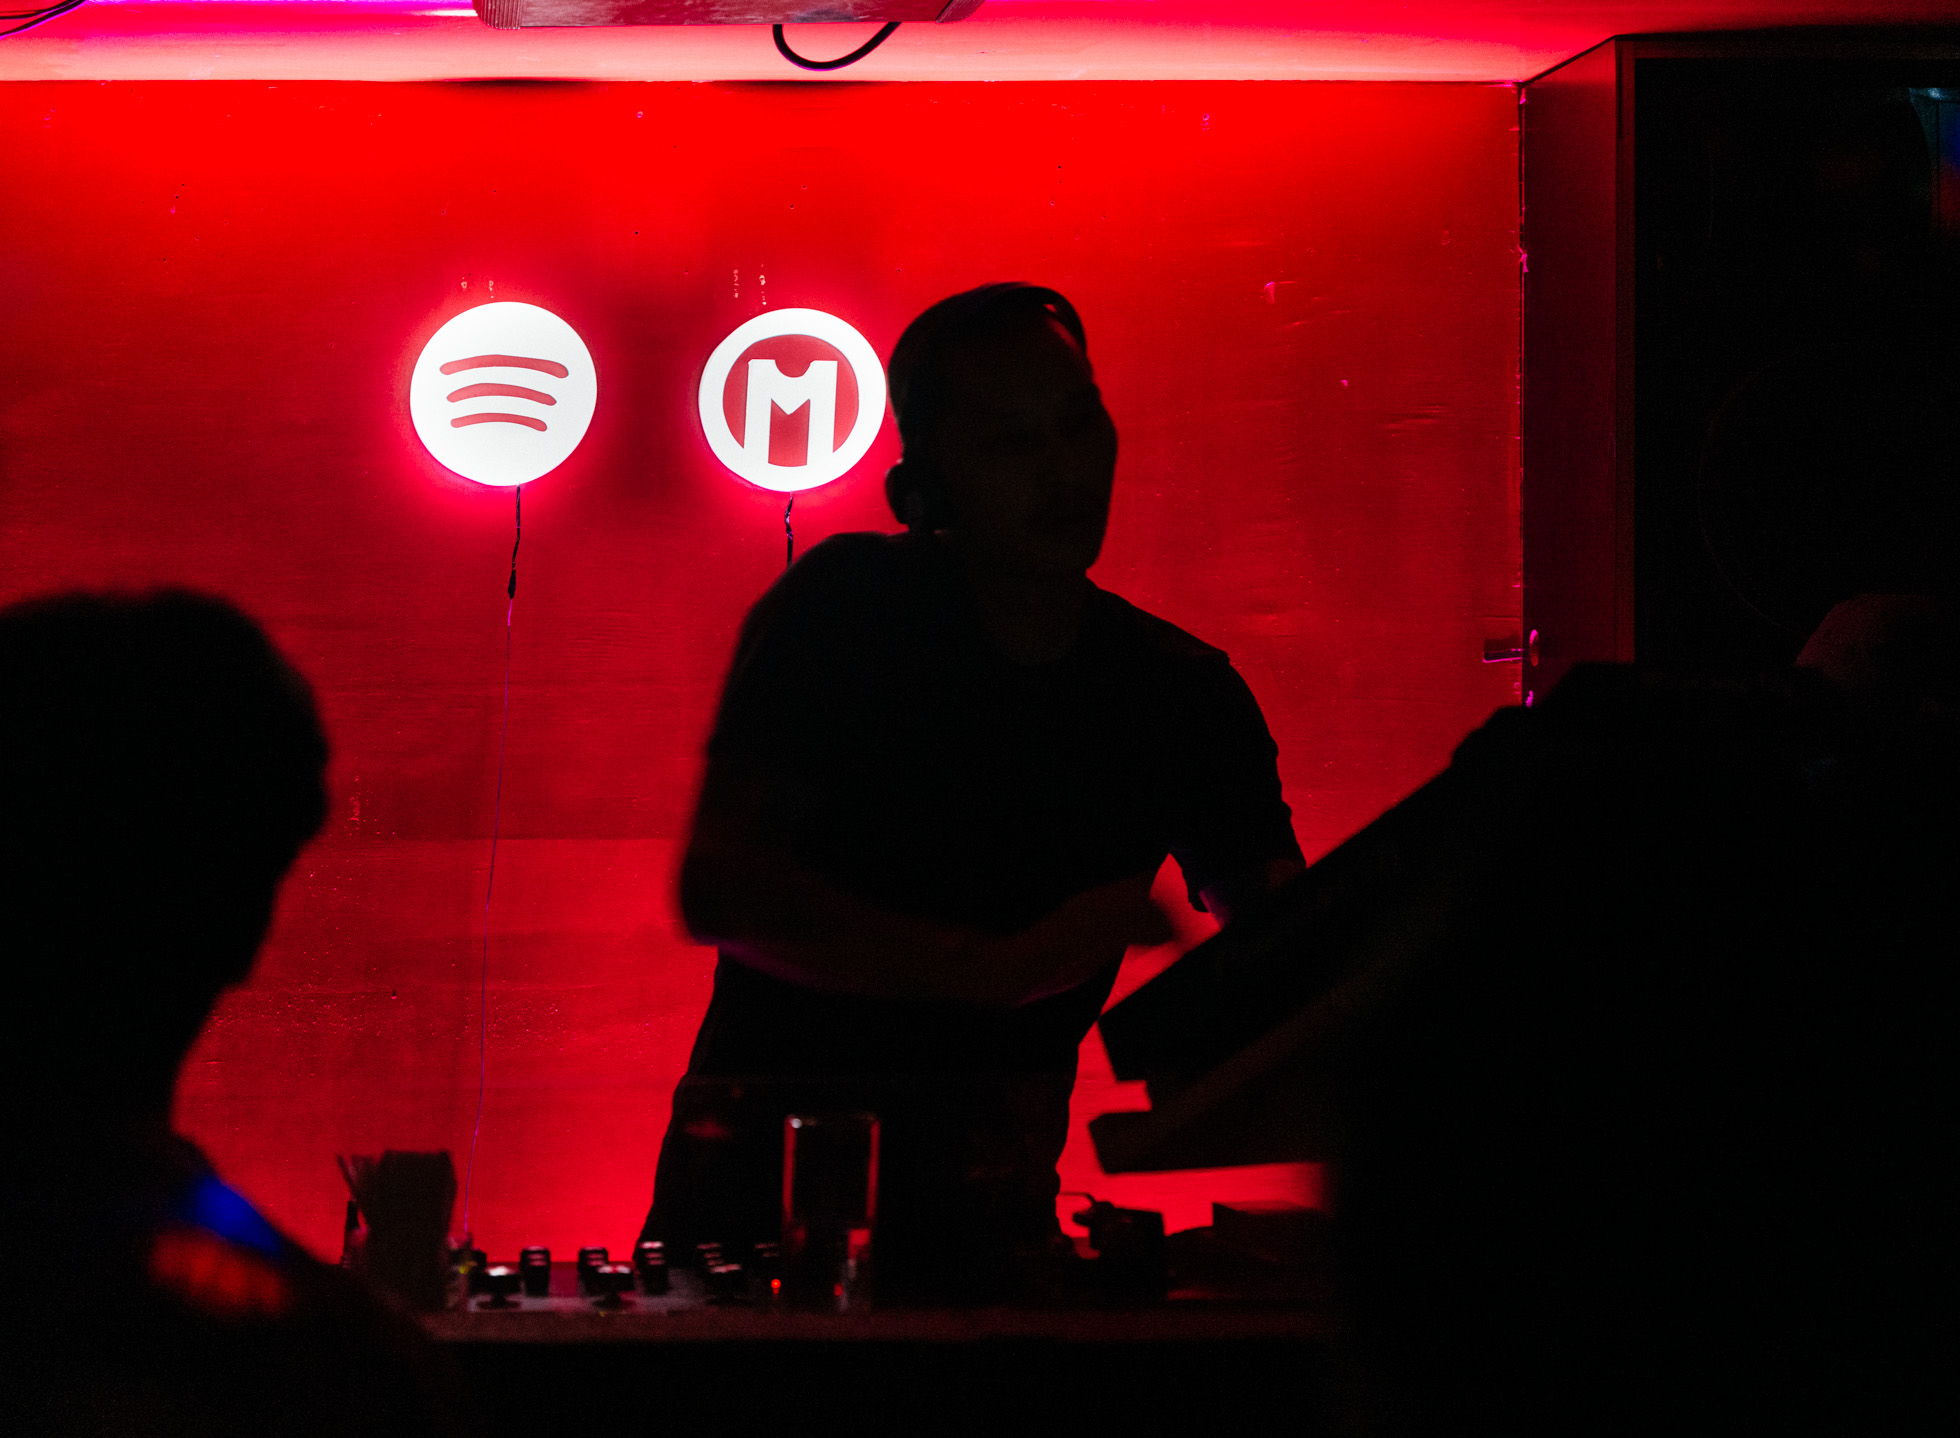 A Night at Spotify IRL, Where Playlists Came to Life